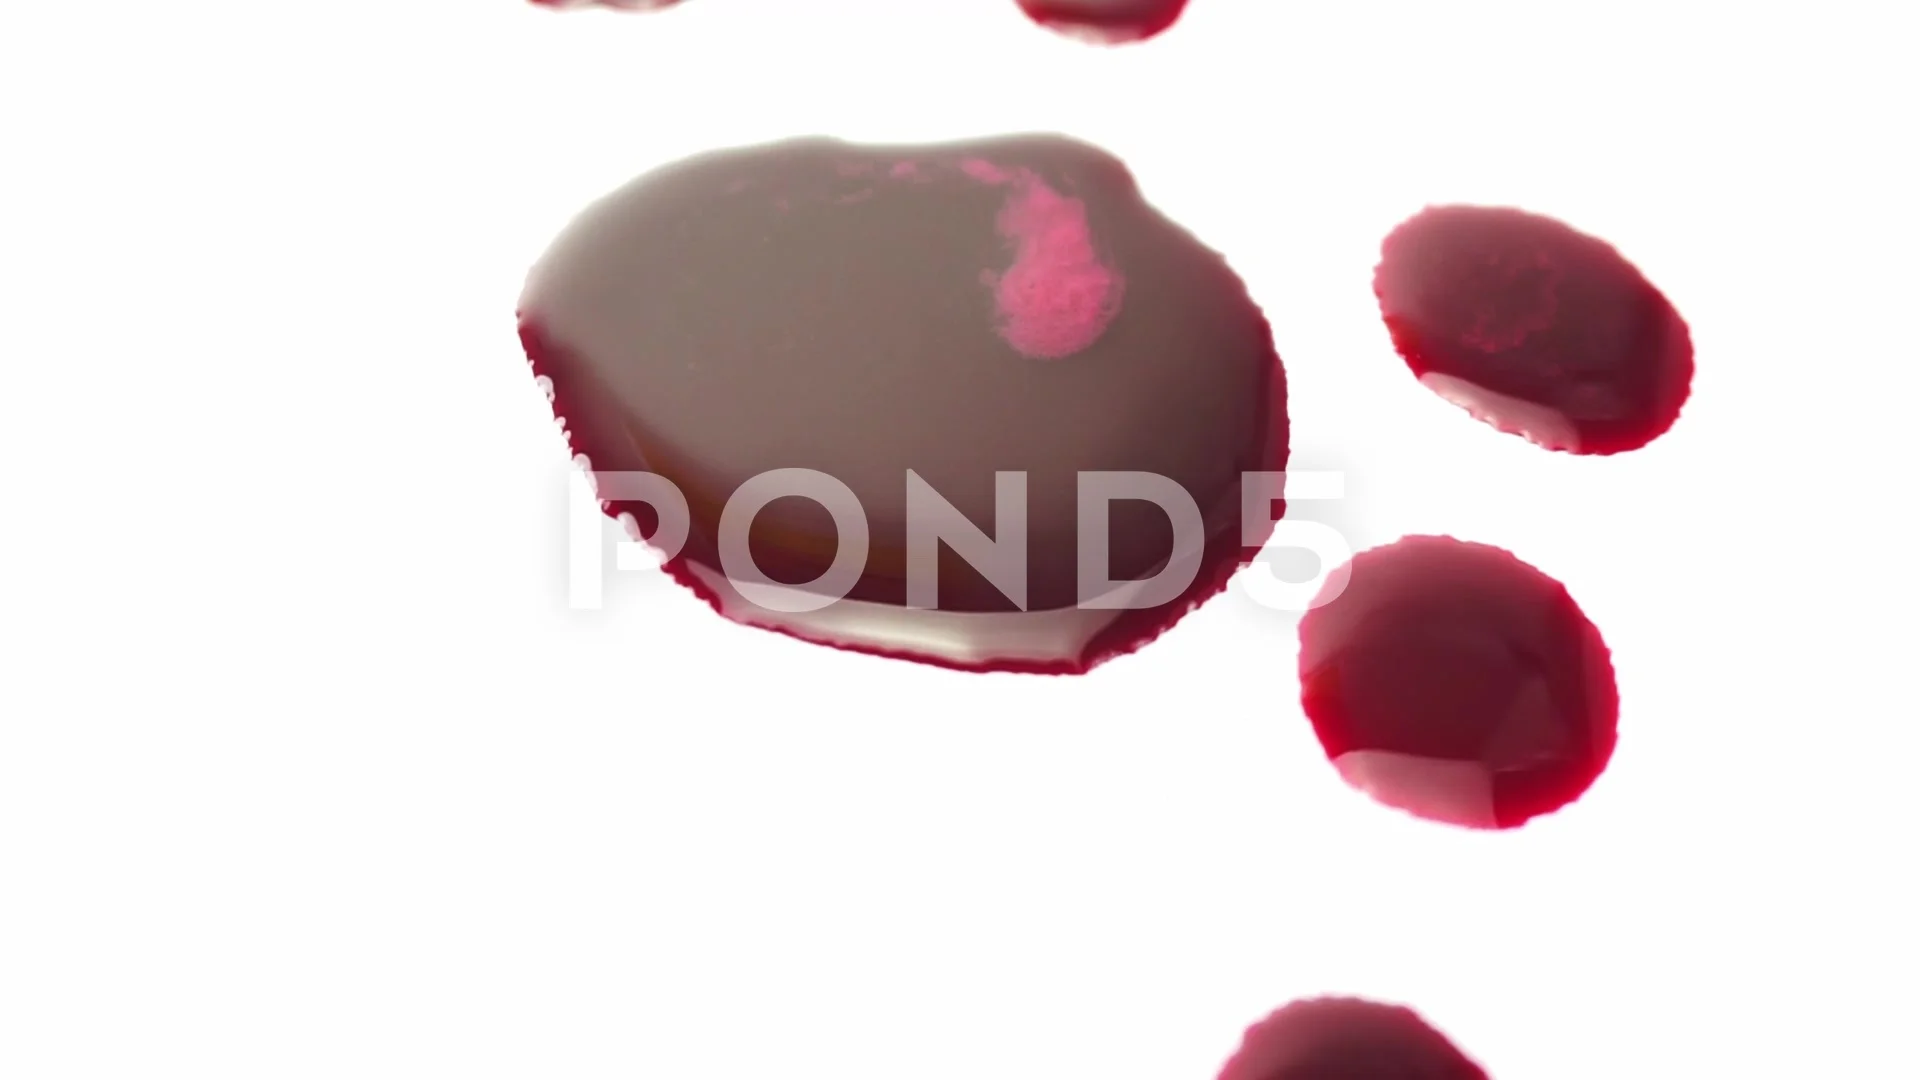 Paint Dripping Blood Stock Footage ~ Royalty Free Stock Videos | Pond5